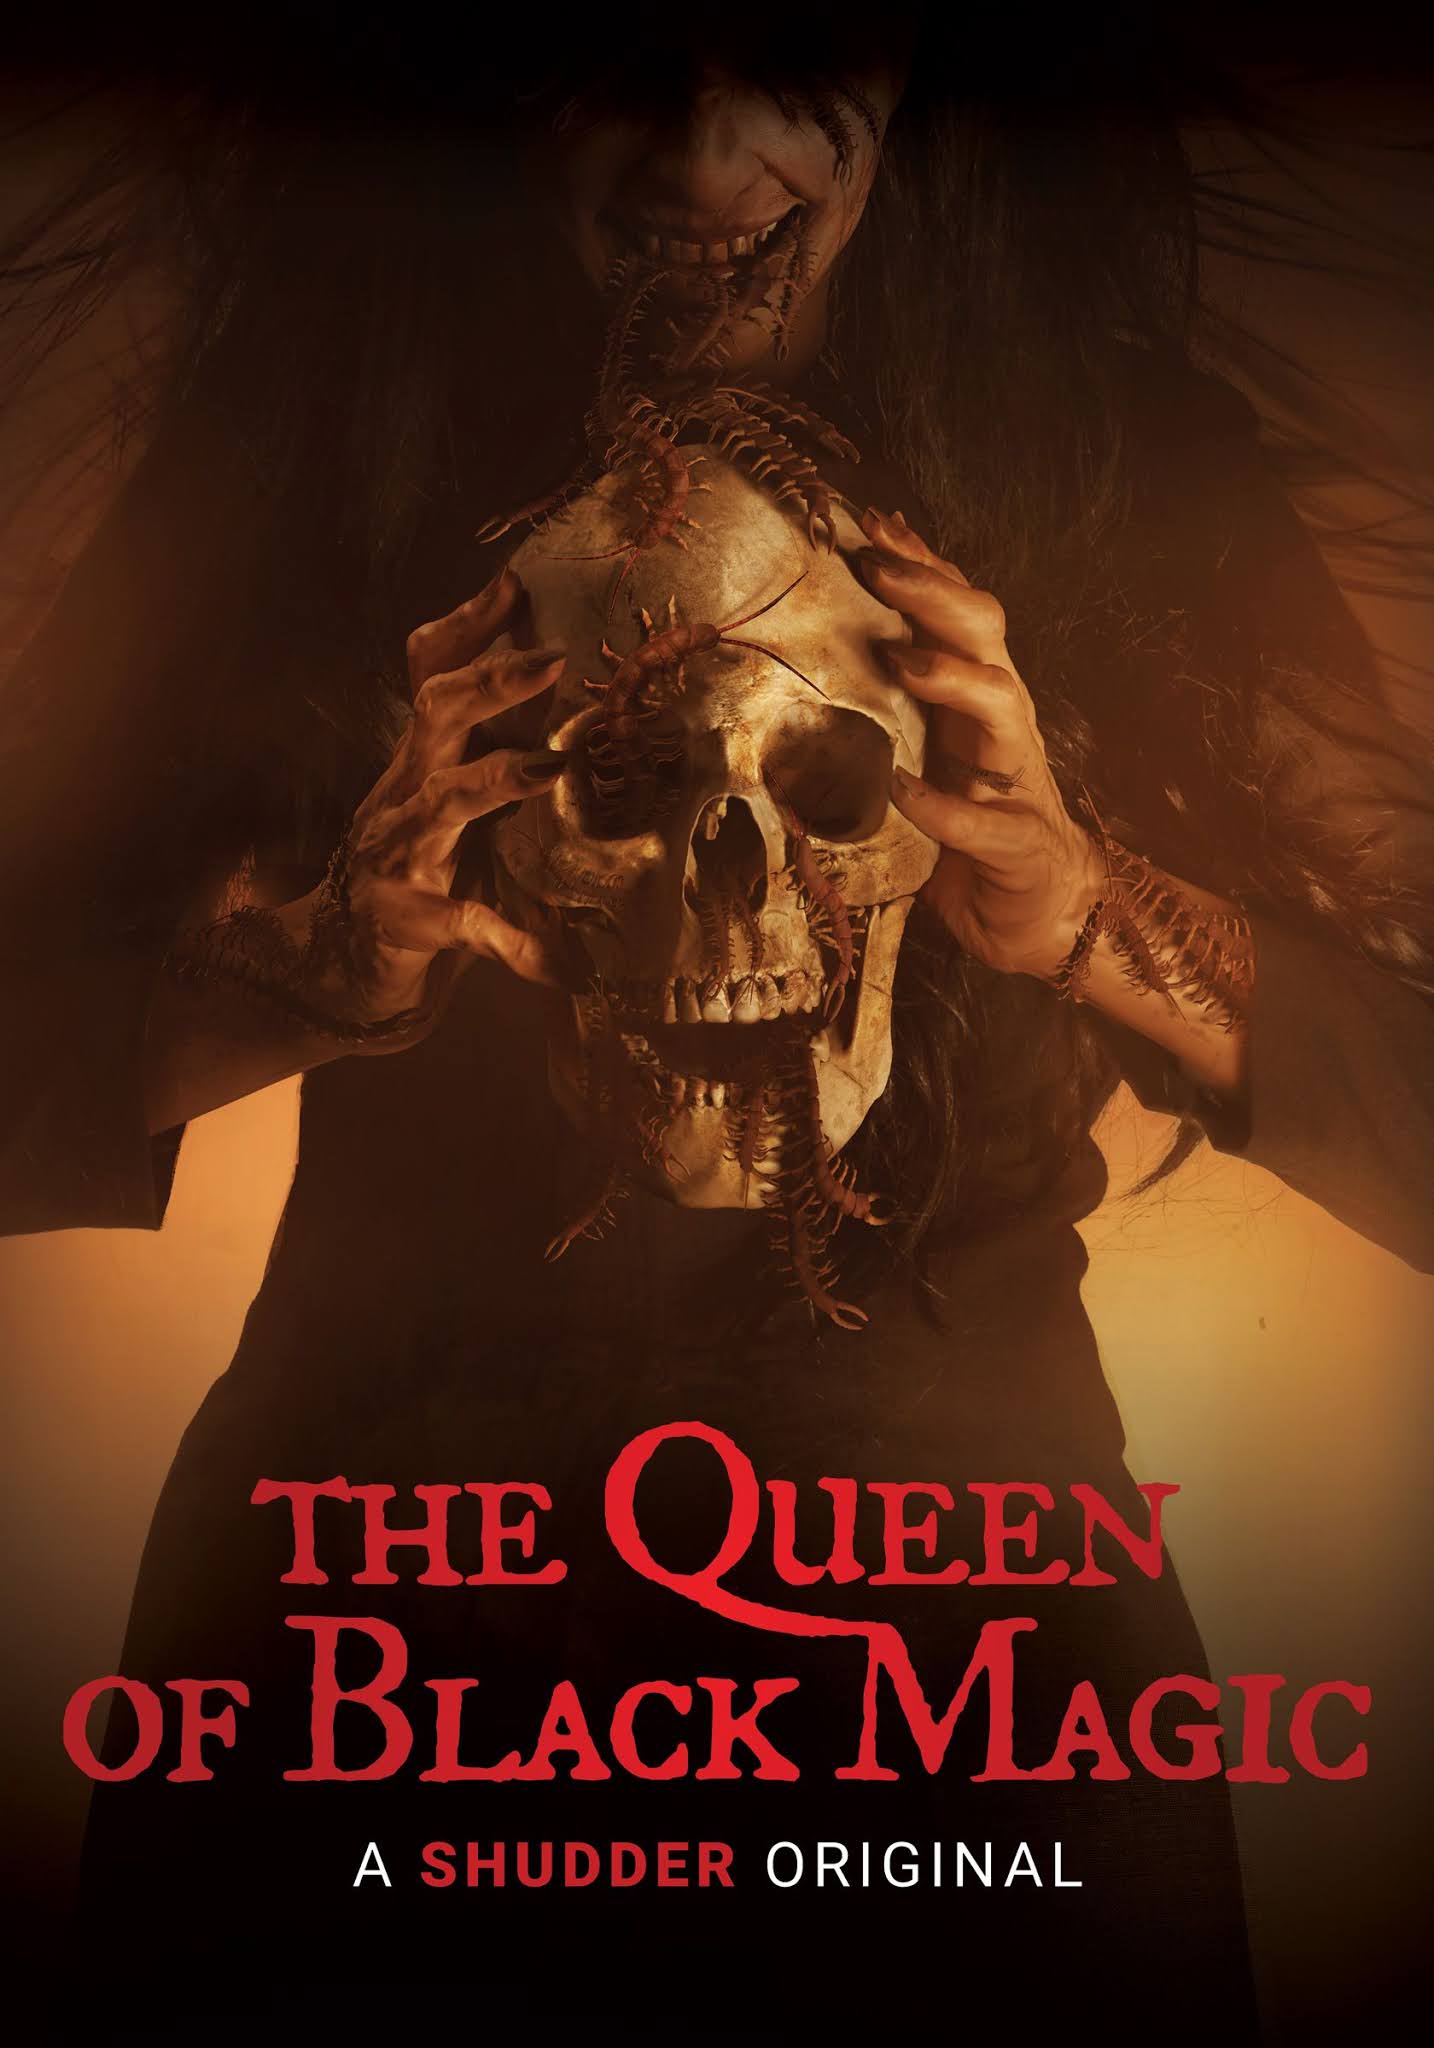 The Queen of Black Magic effectively puts characters through a relentless,  creepy-crawly wringer